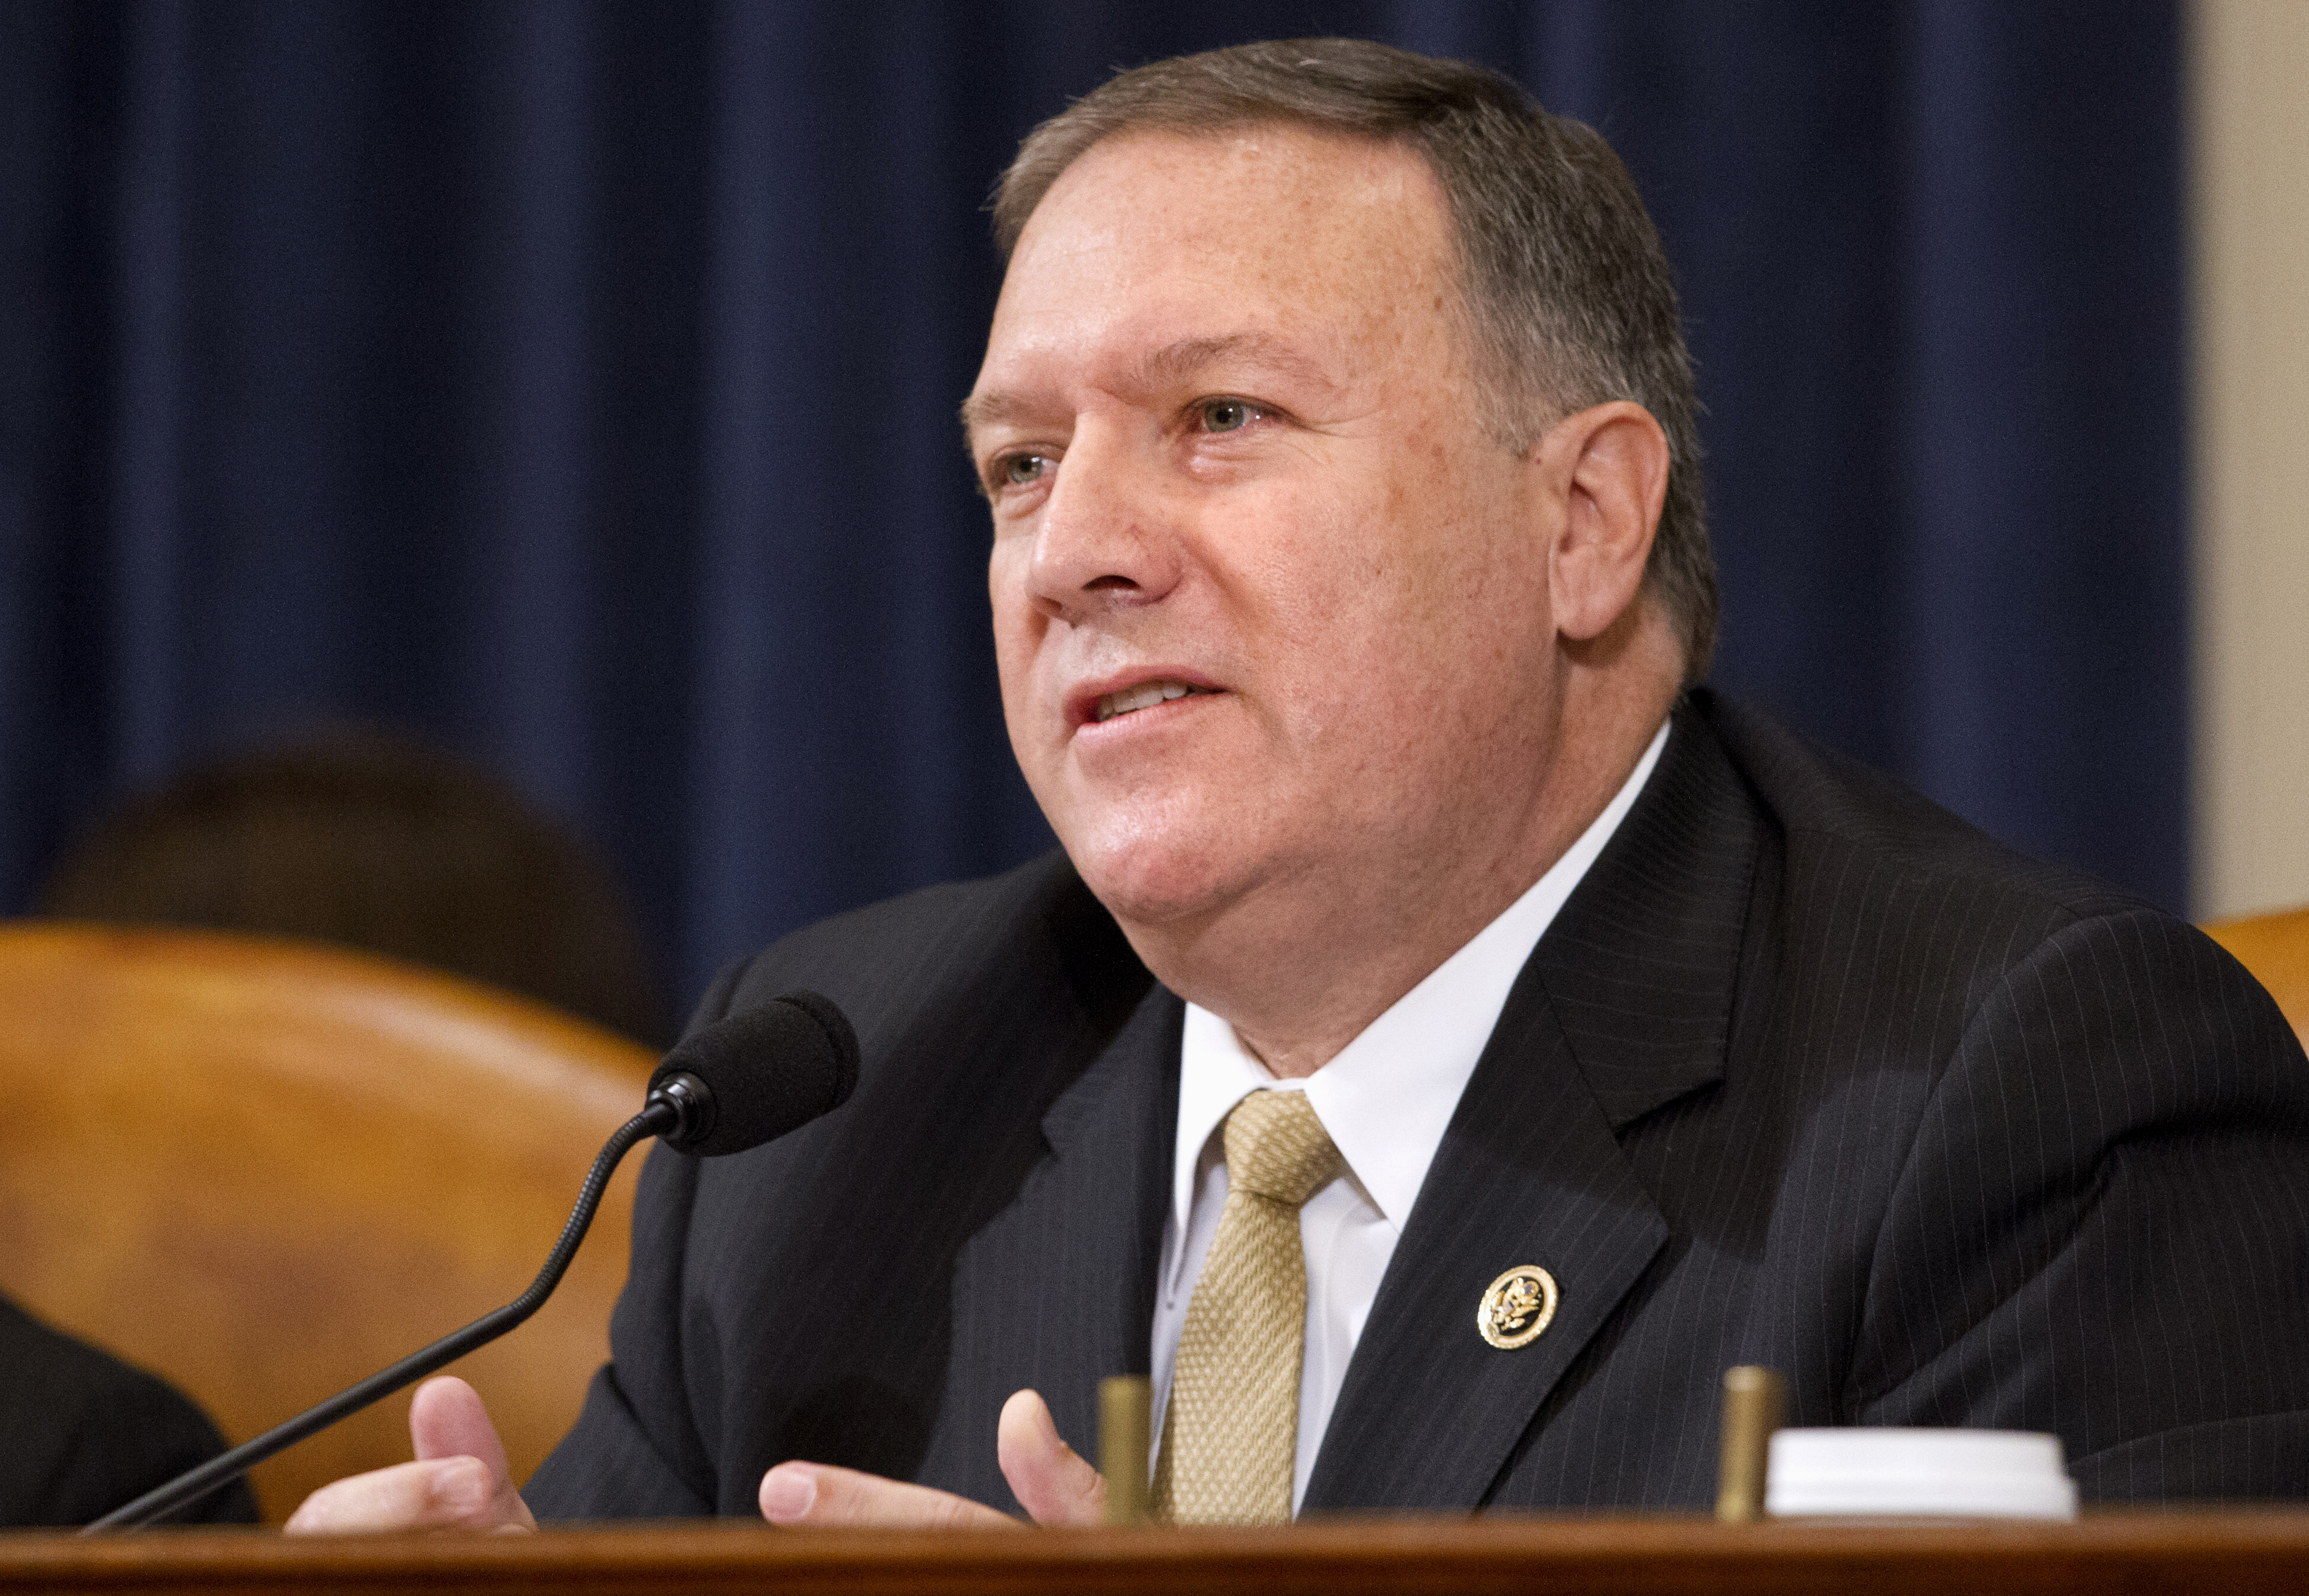 House Benghazi Committee member Rep. Mike Pompeo, R-Kan., questions Democratic presidential candidate Hillary Clinton, during the committee's hearing on Capitol Hill in Washington on Oct. 22, 2015. 